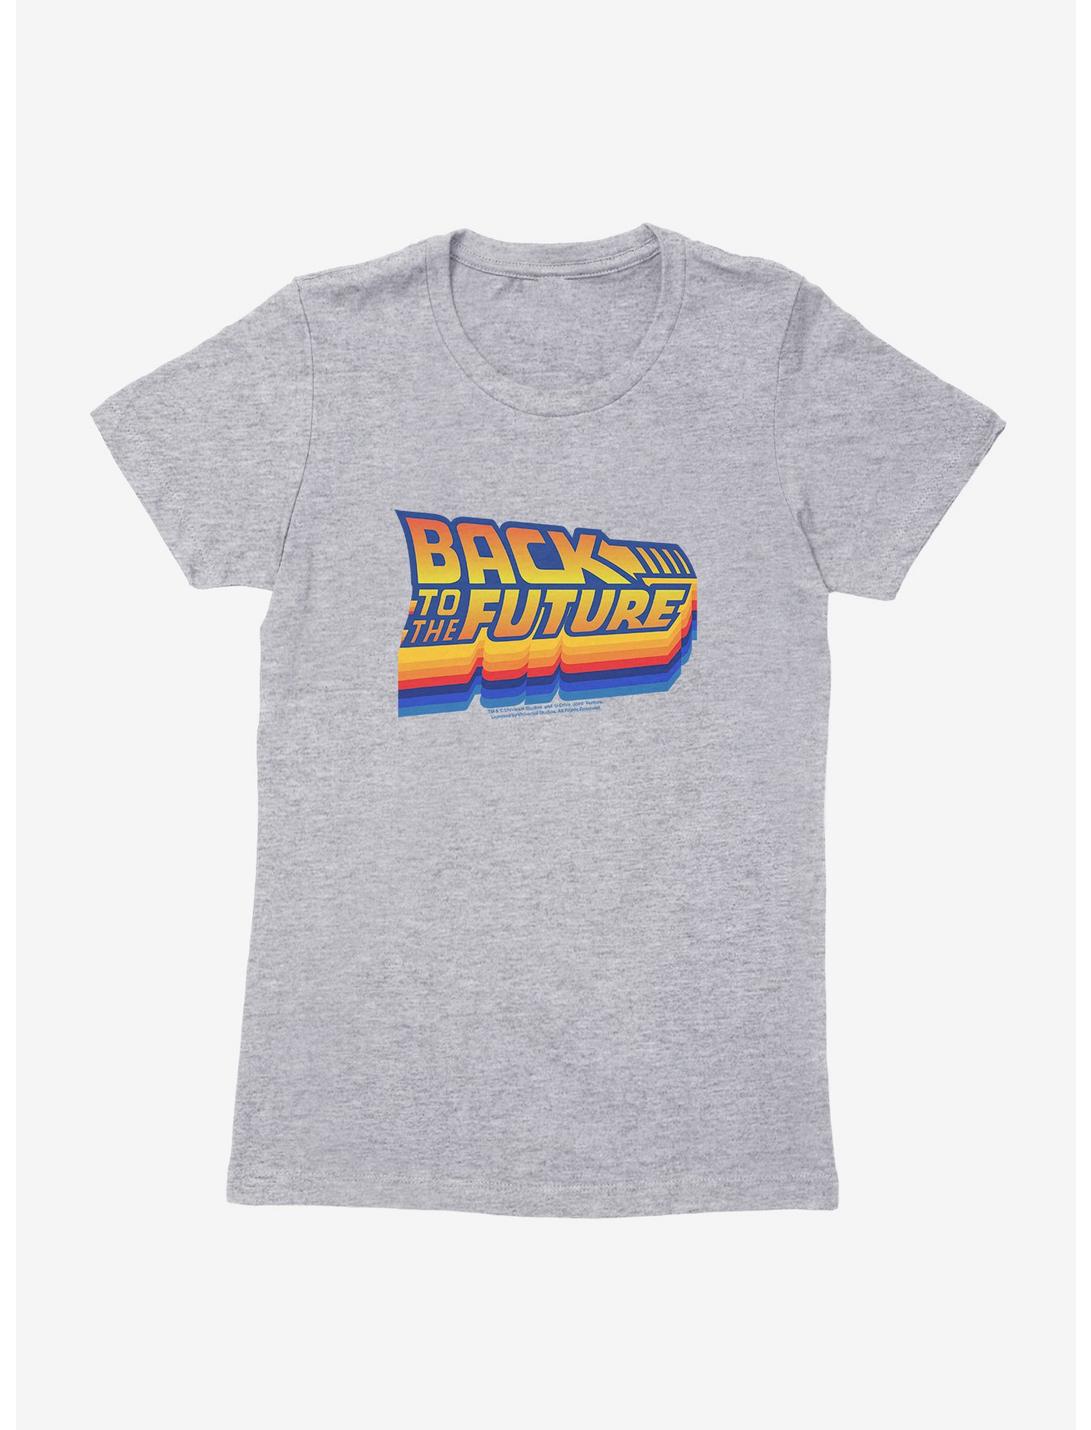 Back To The Future Logo Womens T-Shirt, HEATHER, hi-res